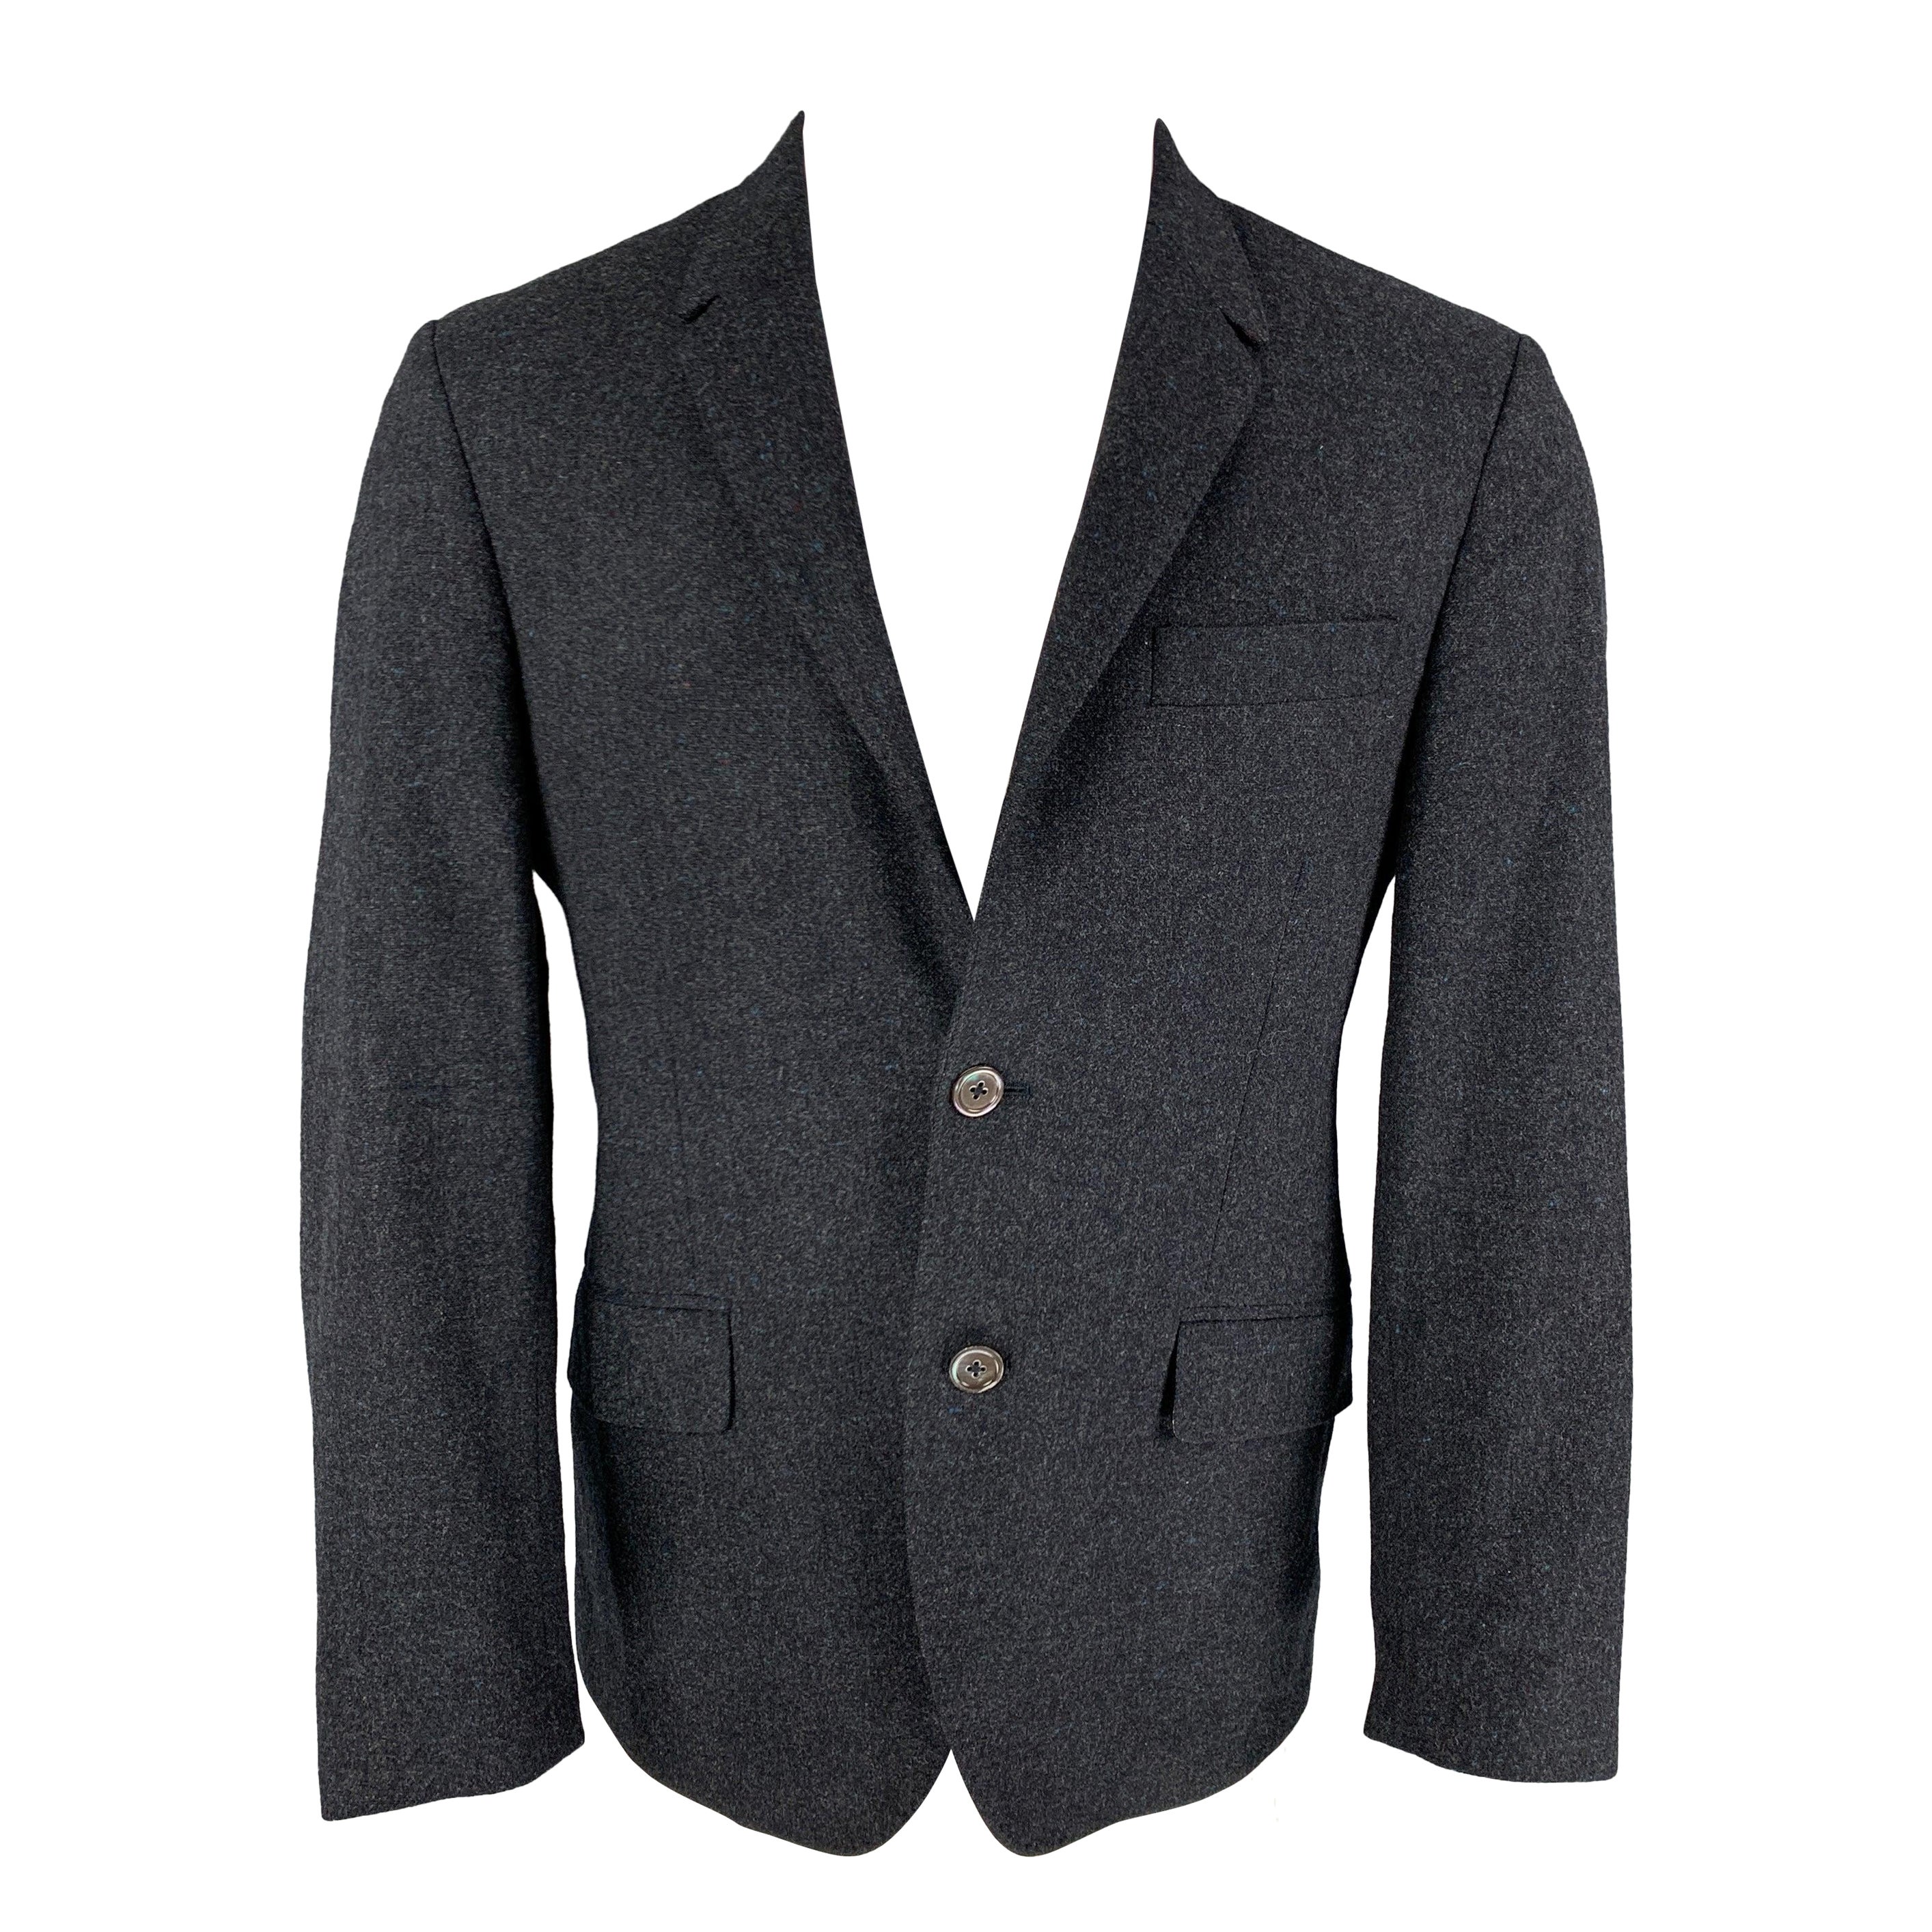 PAUL SMITH The Abbey Size 40 Regular Navy Heather Wool Cashmere Sport Coat For Sale